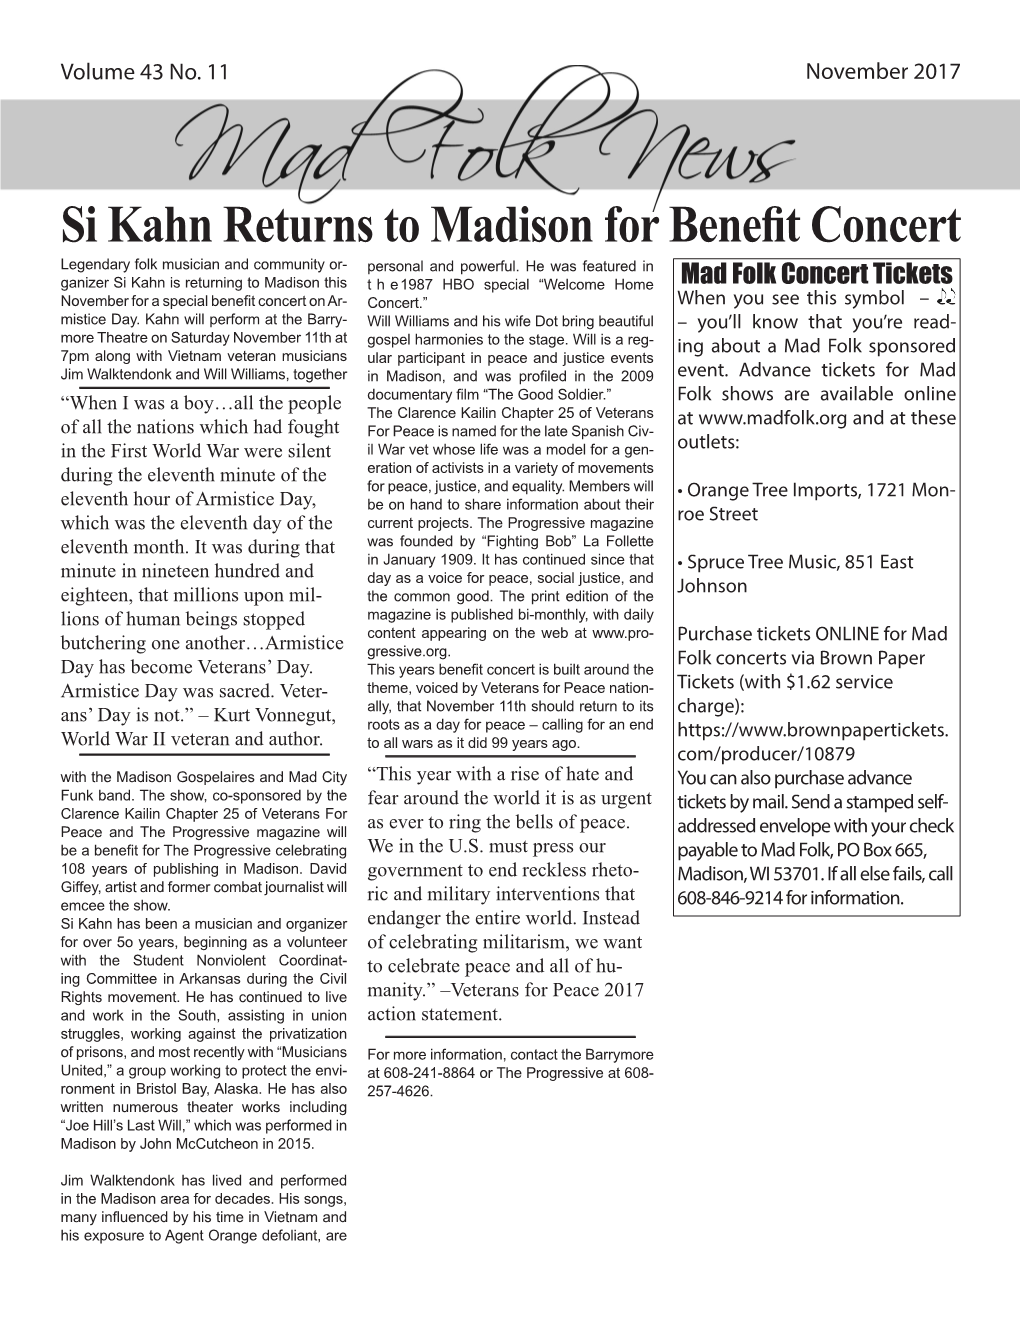 Si Kahn Returns to Madison for Benefit Concert Legendary Folk Musician and Community Or- Personal and Powerful